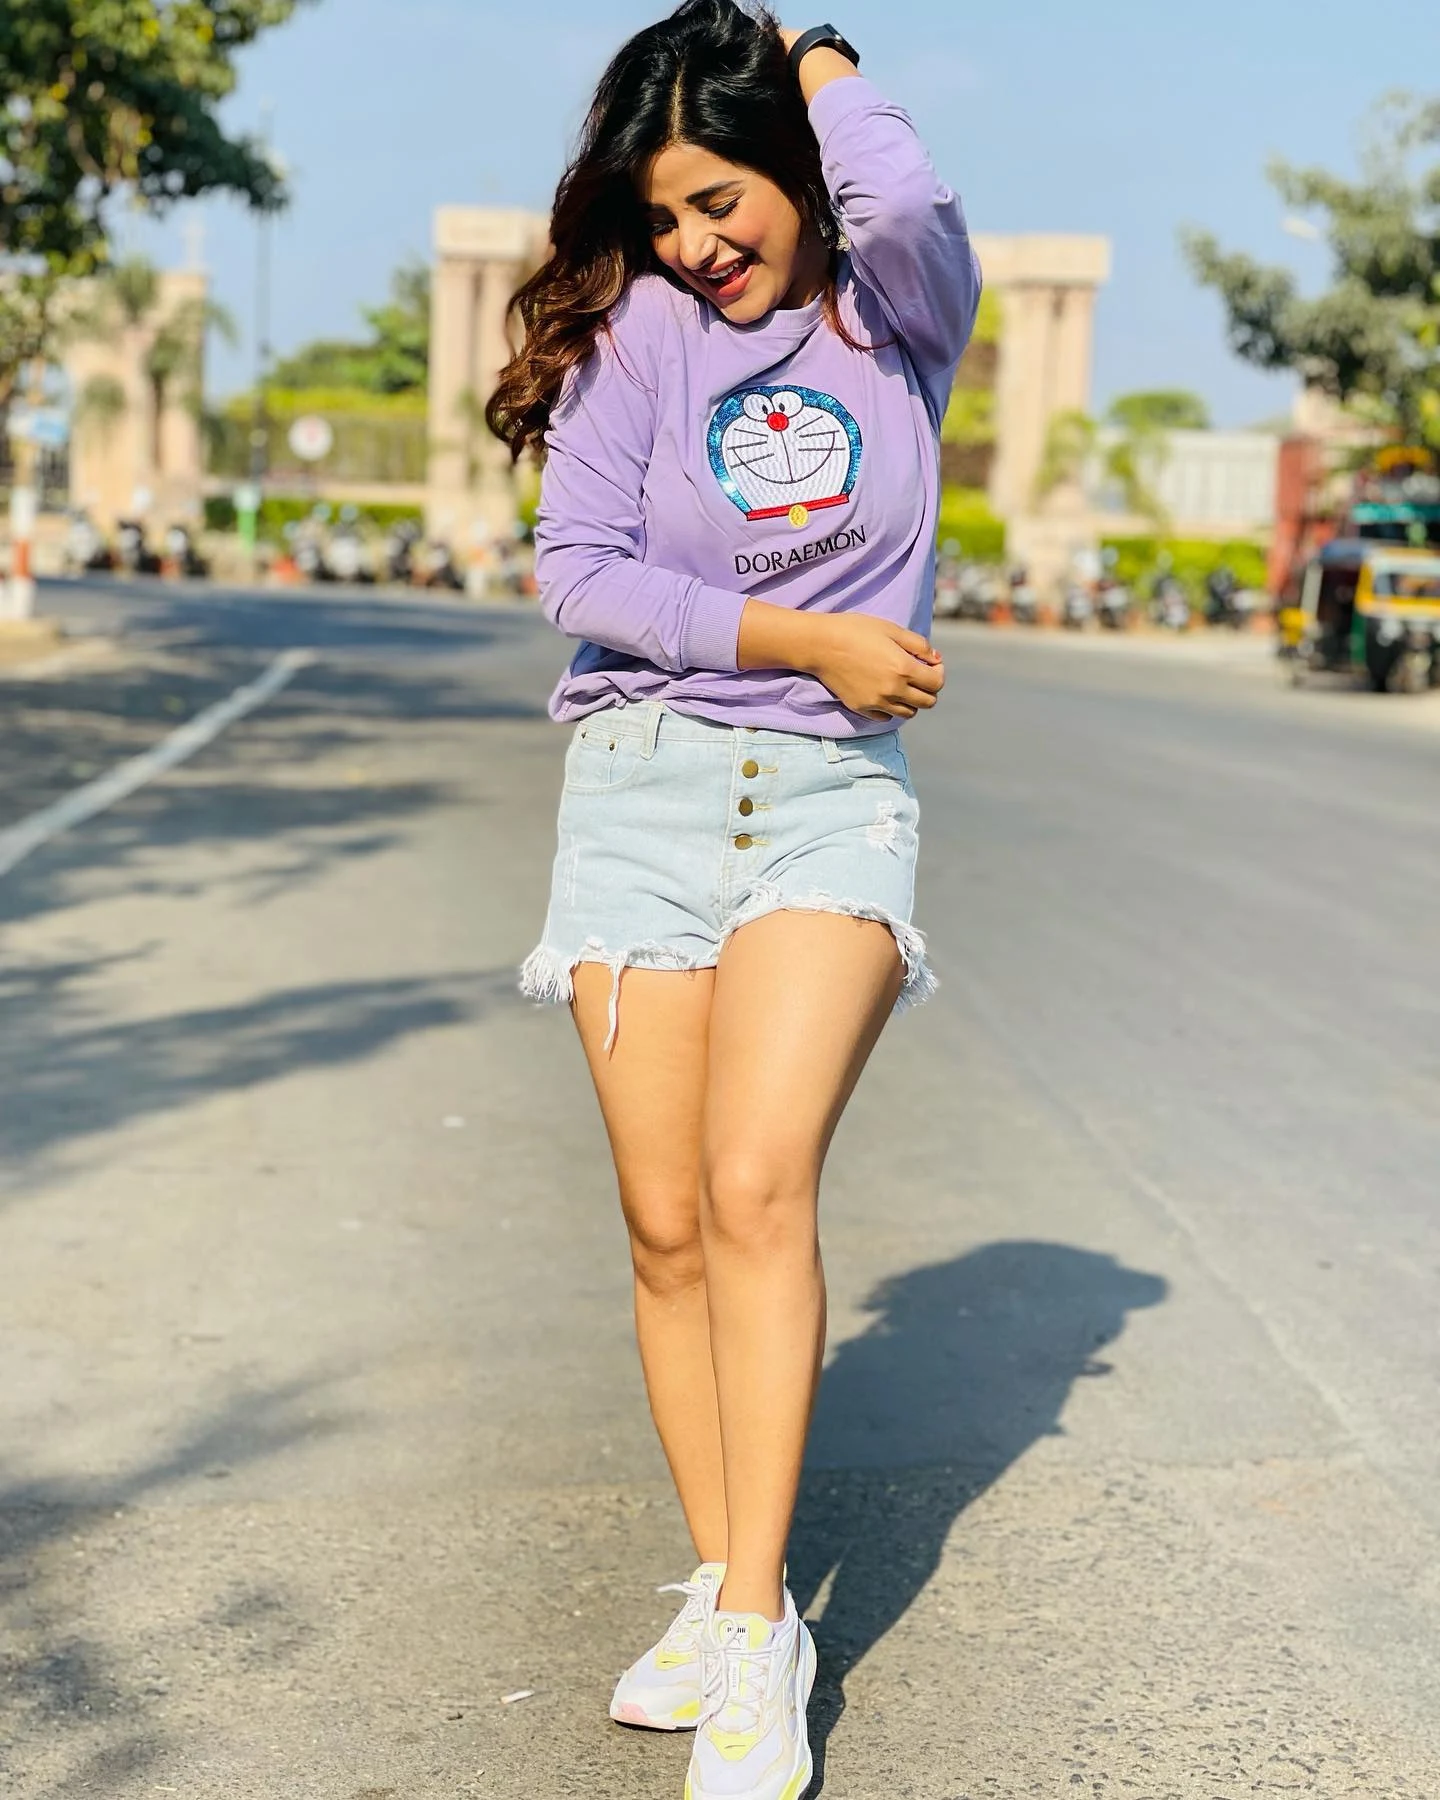 Anushka Srivastava latest hot And Gorgeous looks and sexy thighs in shorts